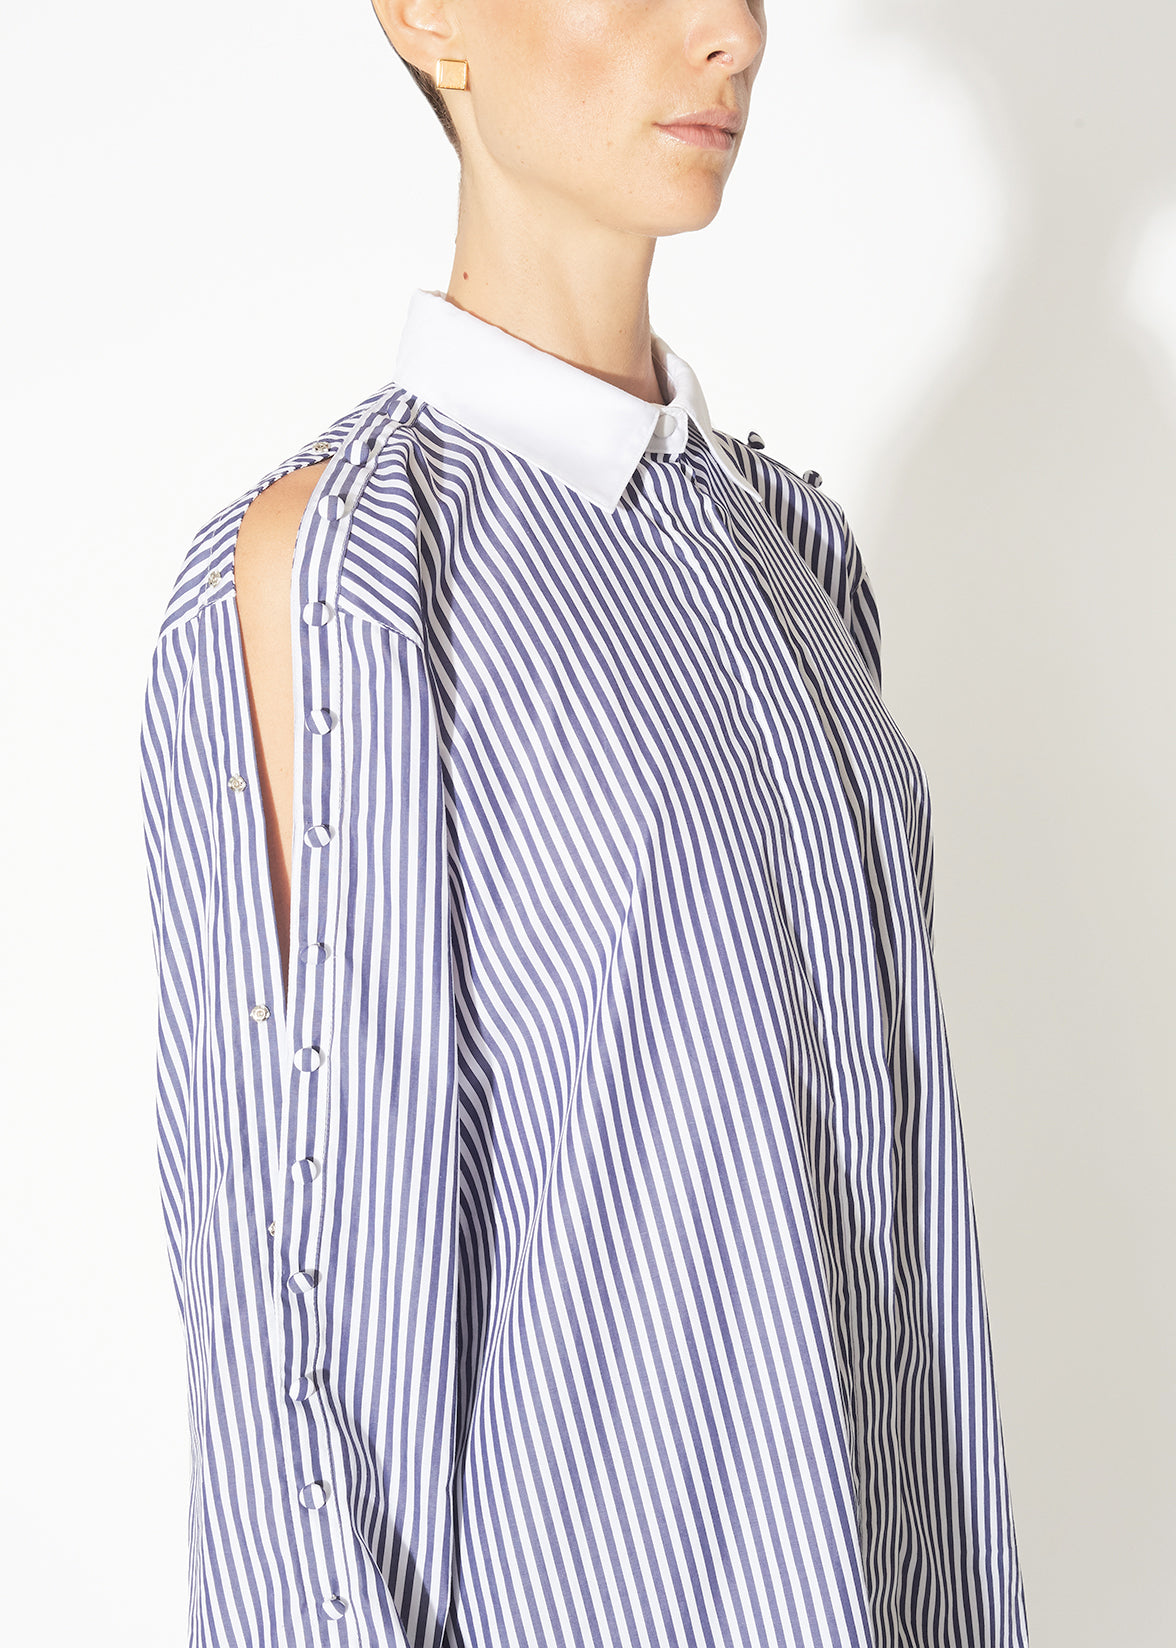 BUTTON SLEEVE SHIRT IN STRIPED SHIRTING